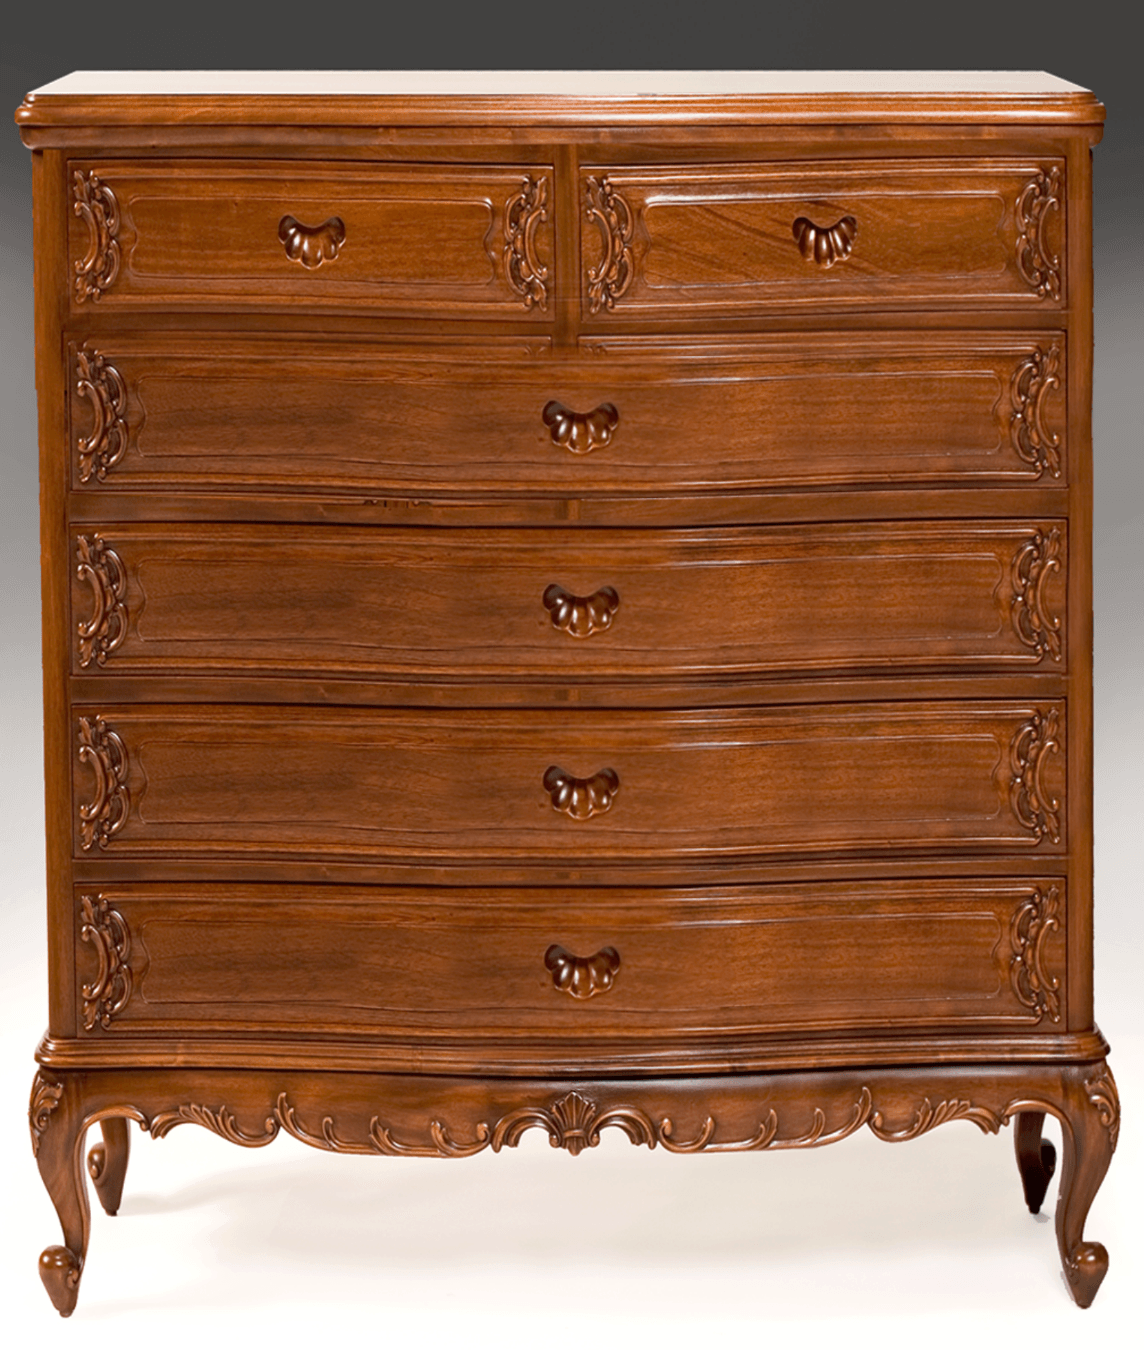 SIX DRAWER SERPENTNE HIGH CHEST - House of Chippendale